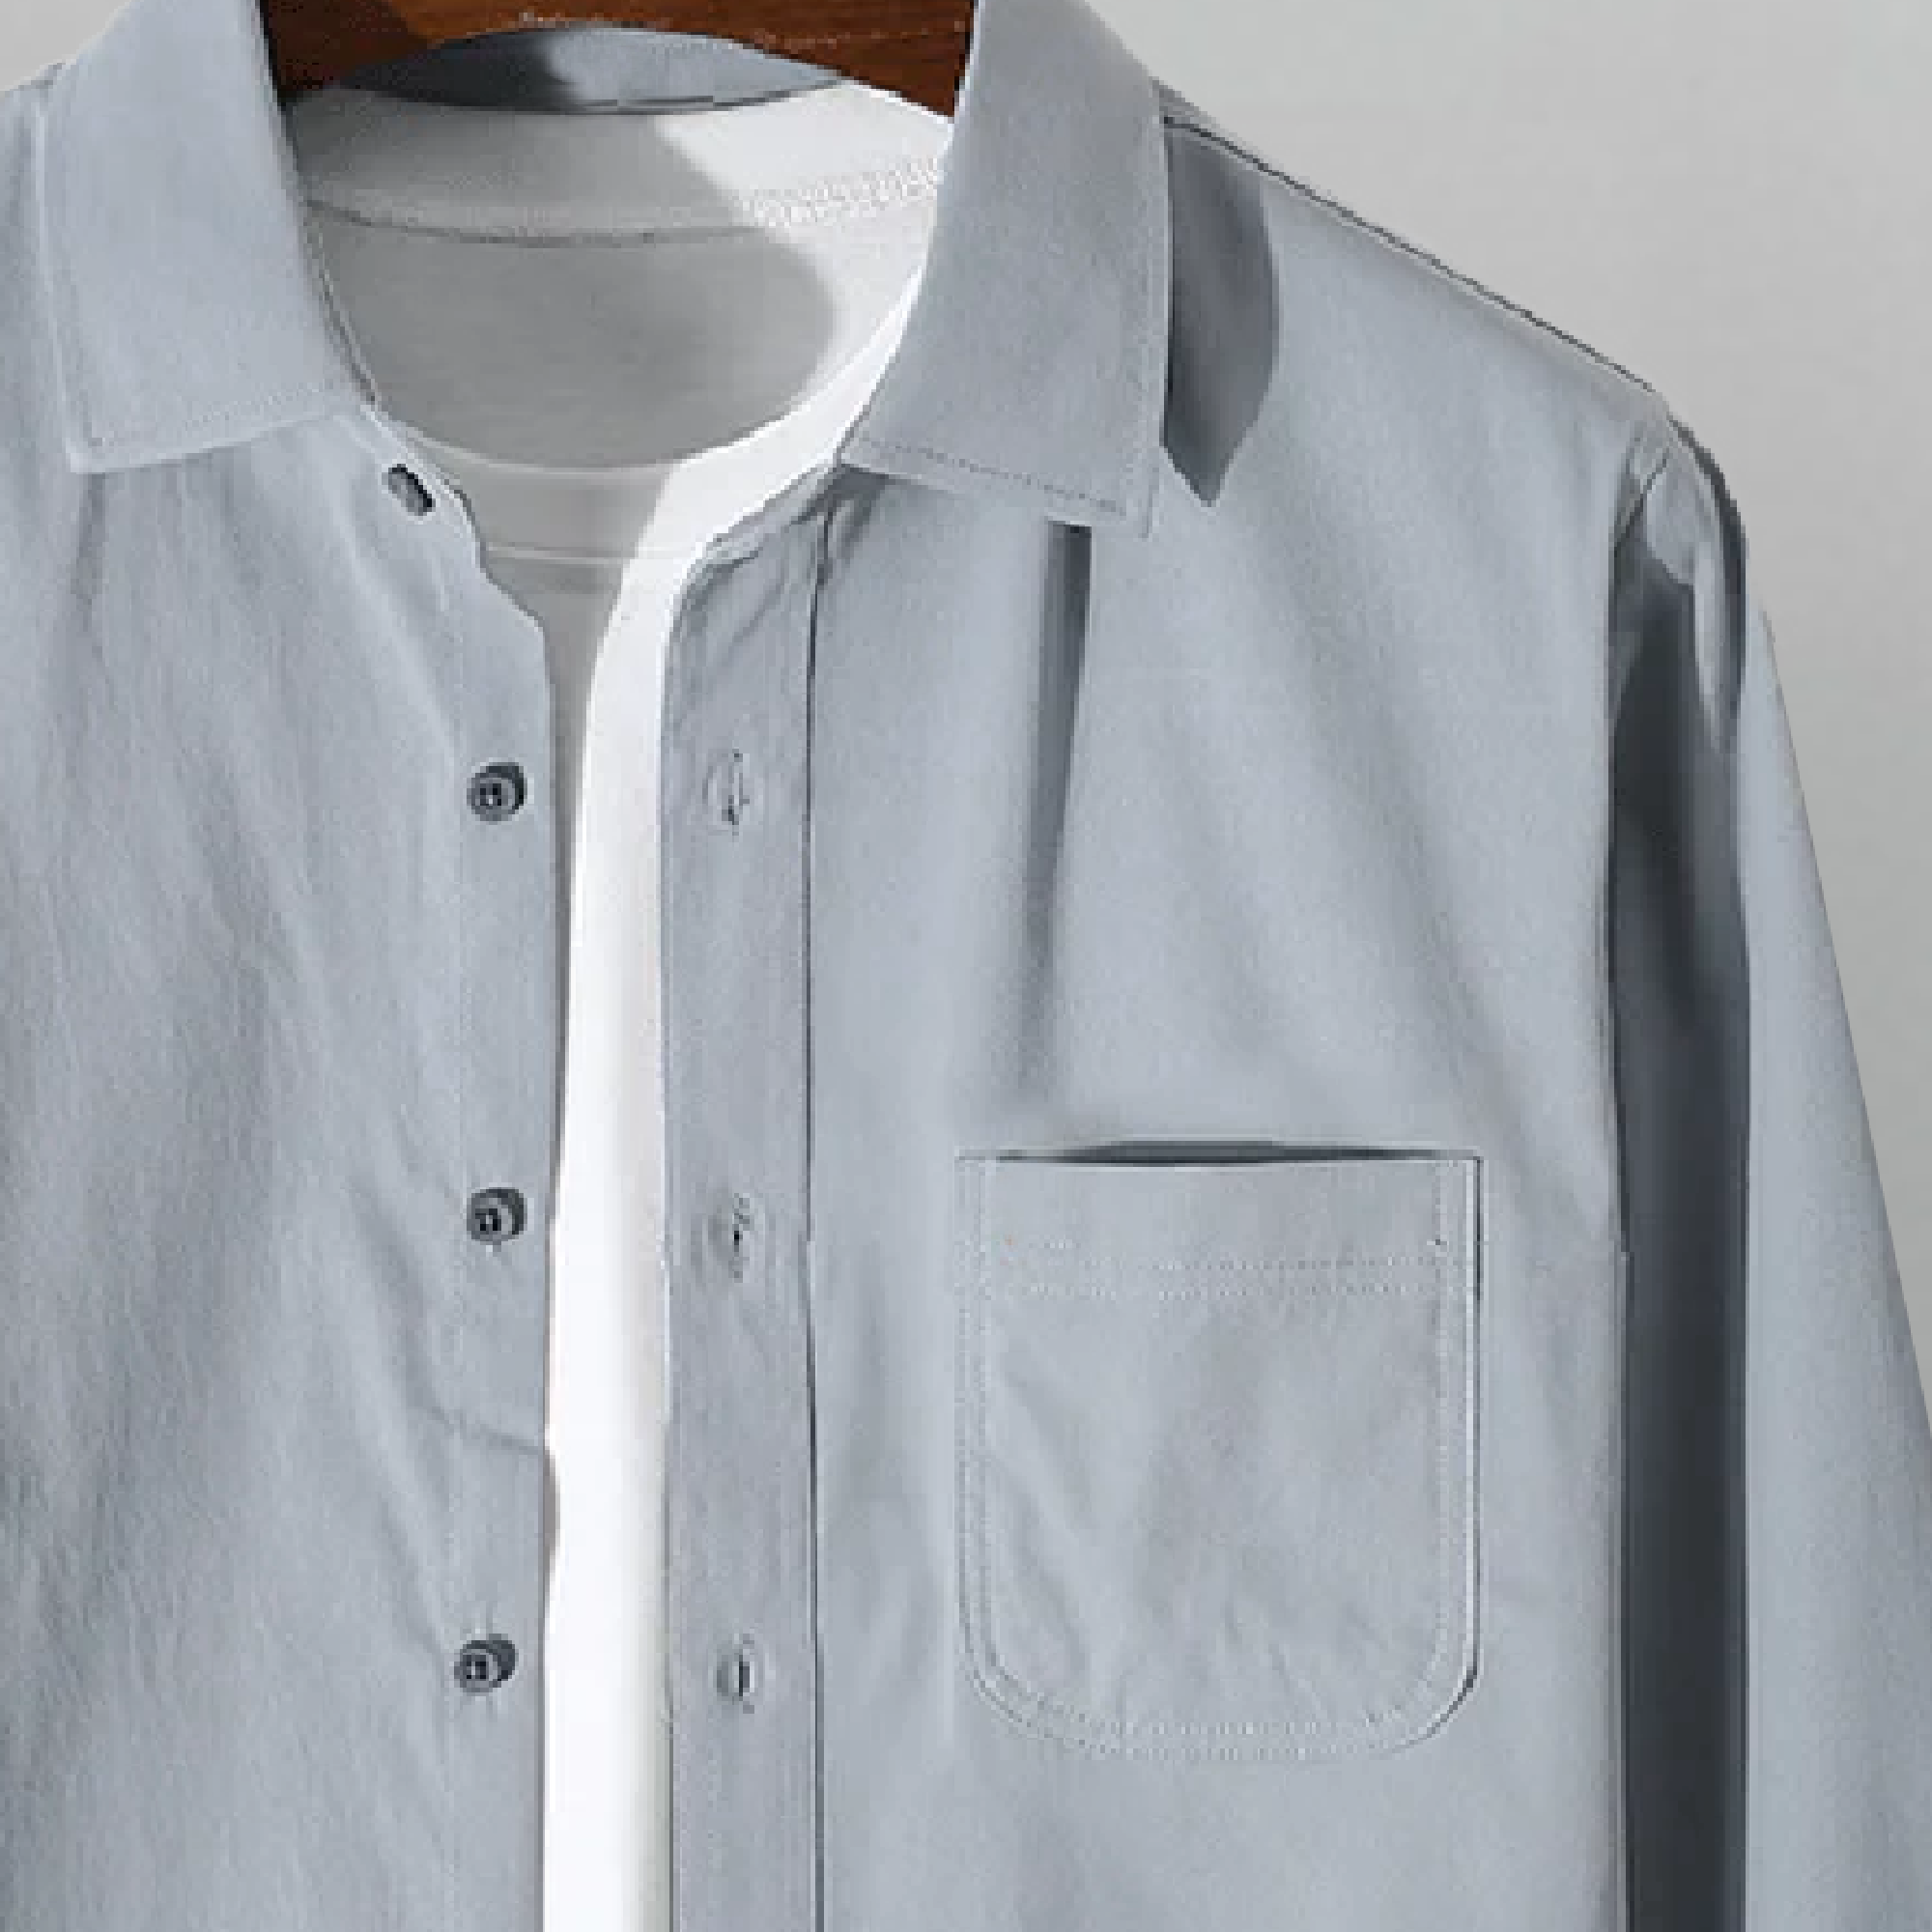 Men's Sky Grey Corduroy collared  Shirt with one side pocket and A Plain white T-shirt-RMS021